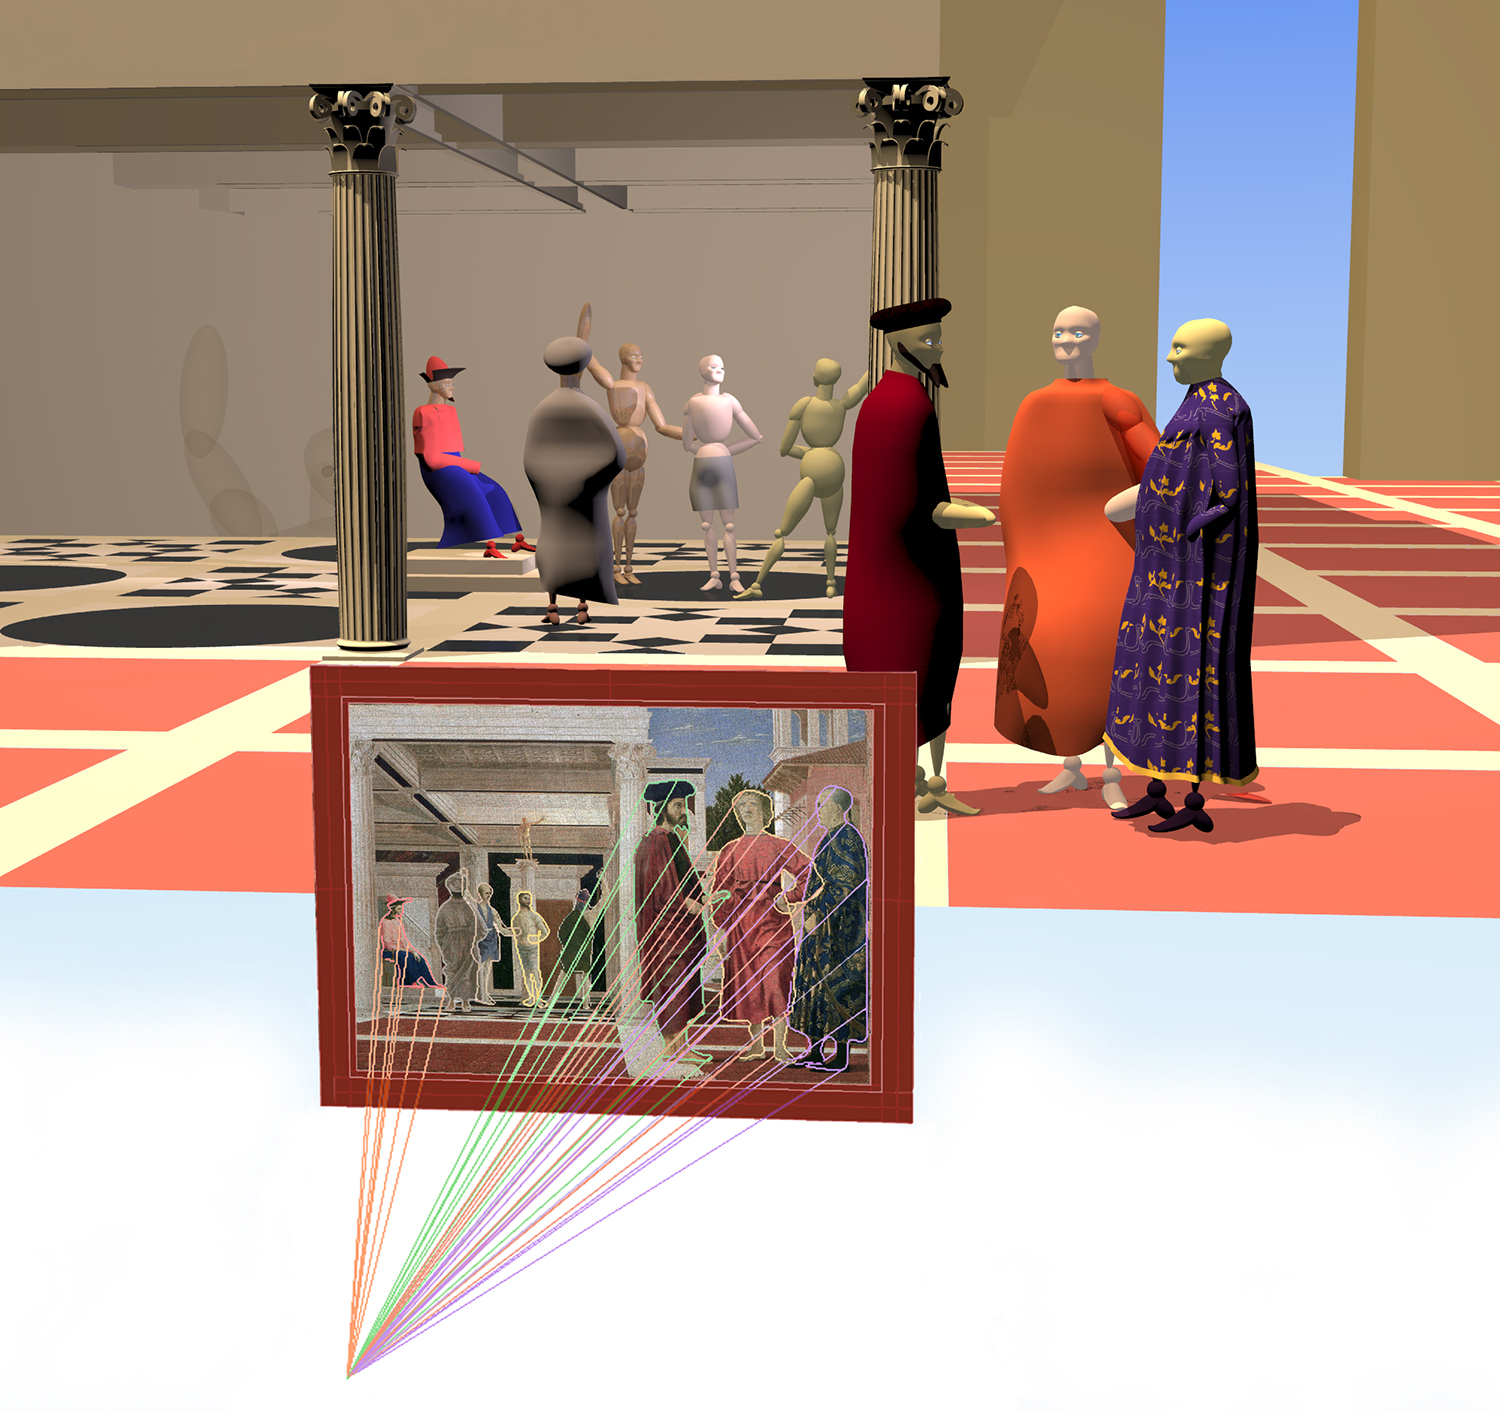    Flagellation,    2010,  three dimensional computer model of Piero della Francesca's The Flagellation of Christ. An older version of this project was exhibited in  Simulations , solo show curated by Tyna Harber Caldarone, Holden Street Gallery, Pro